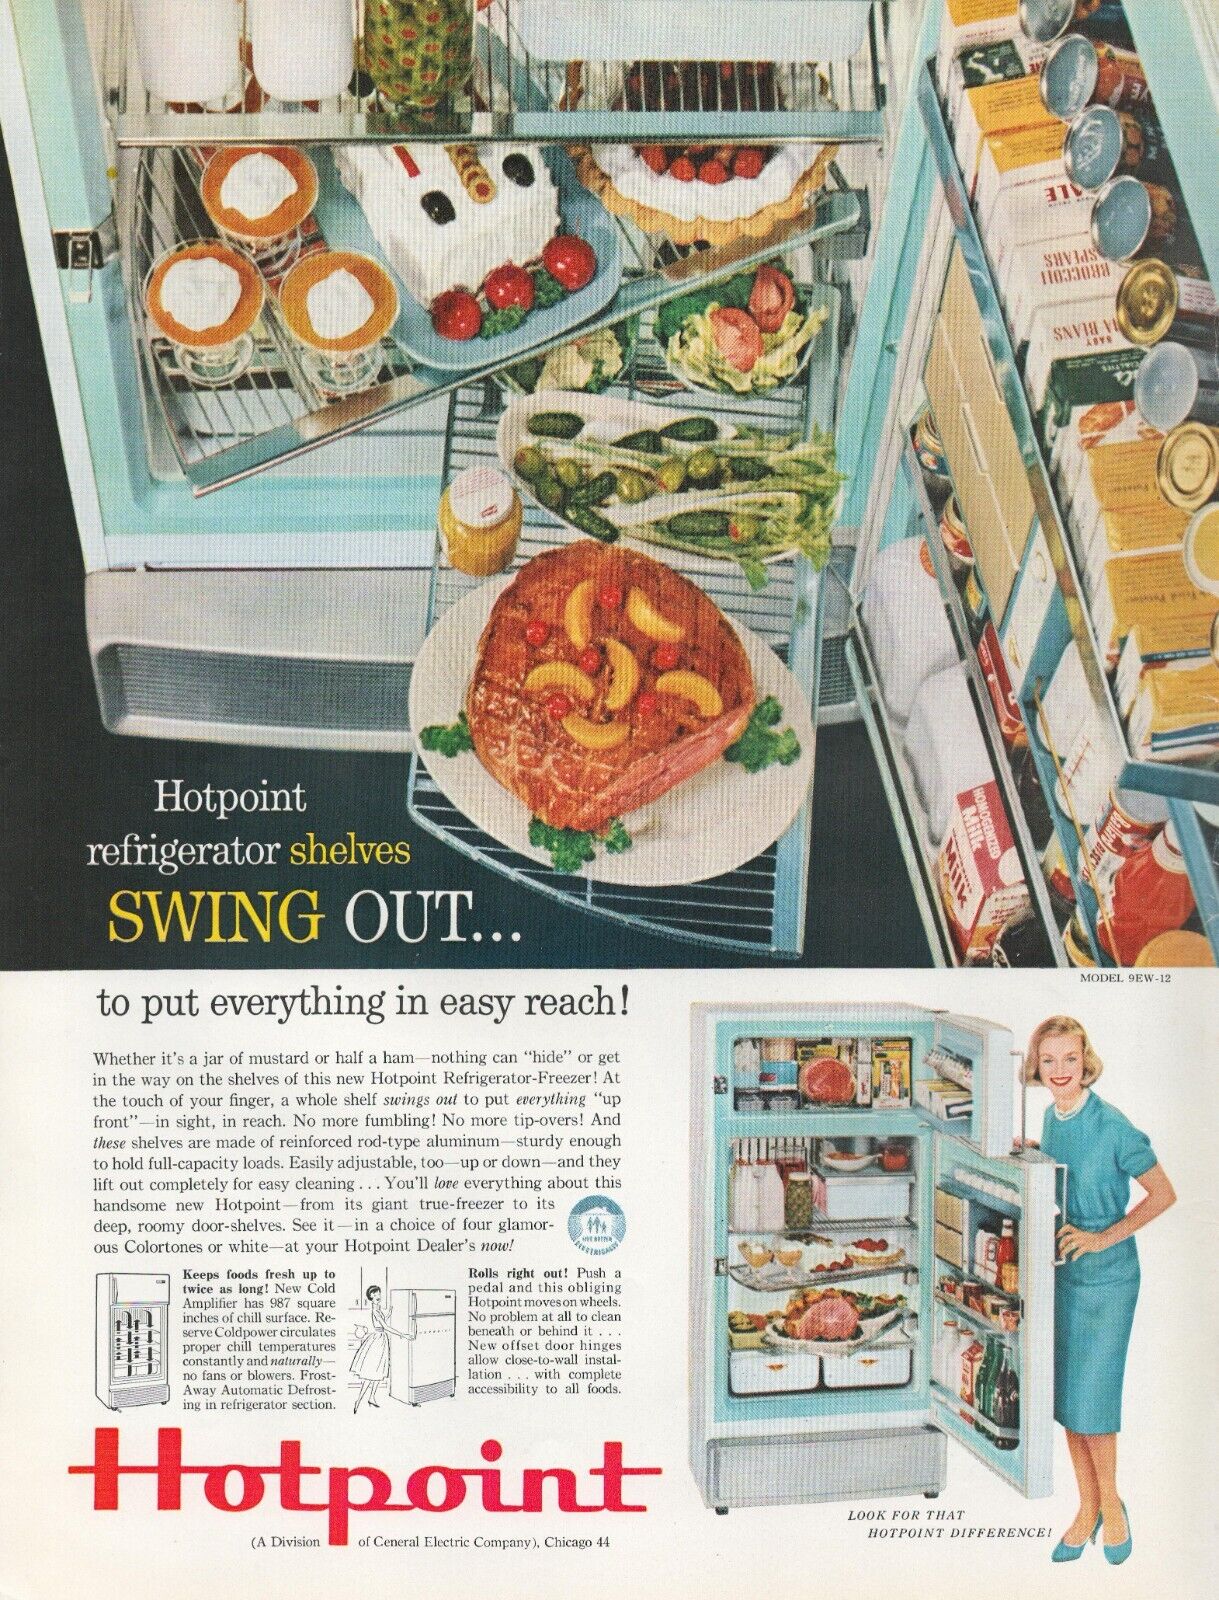 1959 Hotpoint Refrigerator Shelves Swing Out Easy Reach Vintage Print Ad L18